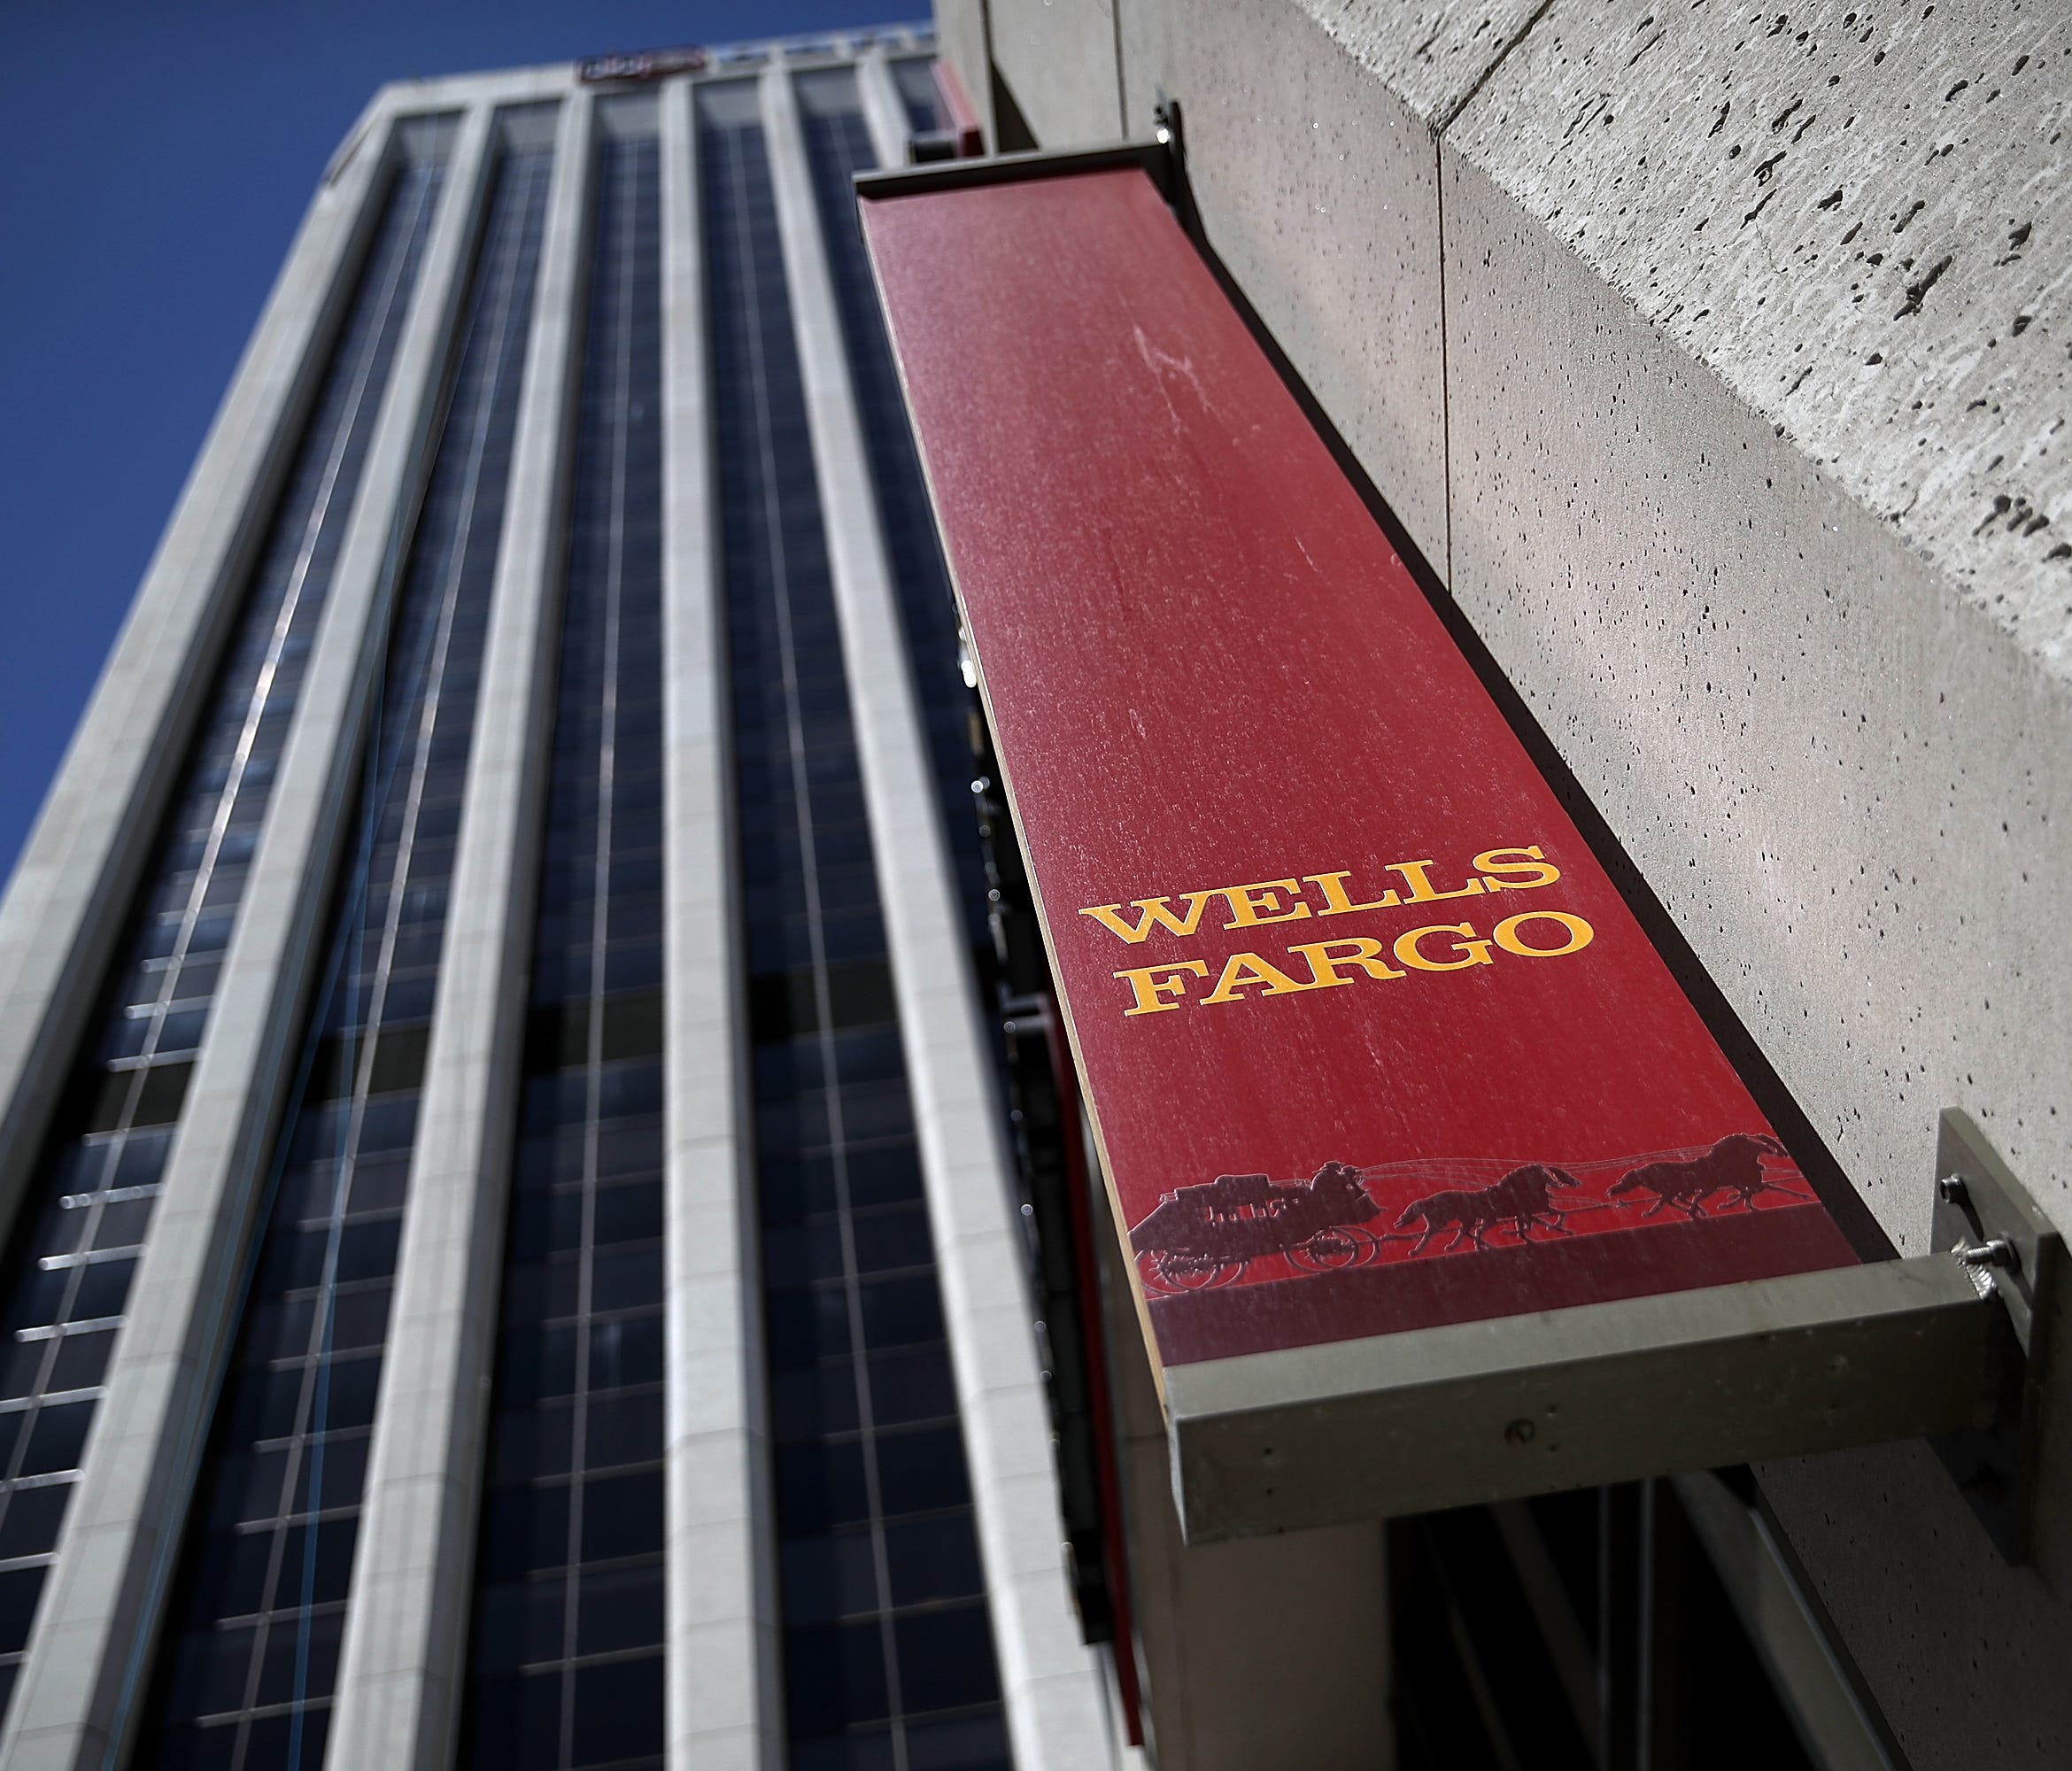 This file photo taken in 2017 shows a Wells Fargo sign at one of the bank's branch offices in San Francisco.